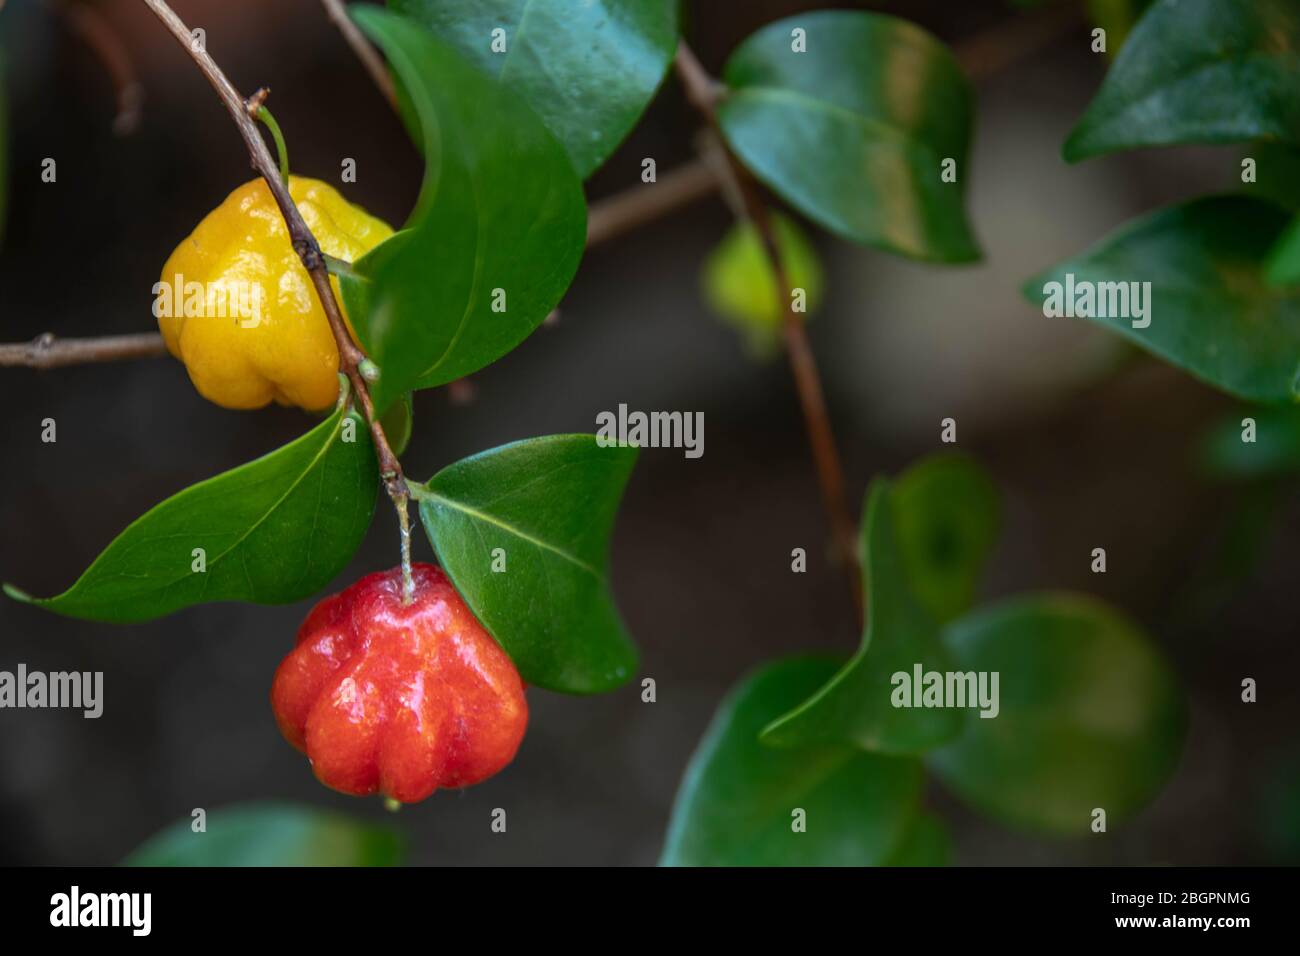 Eugenia uniflora or Suriname cherry is a species native to South America countries and has medicinal properties such as its antioxidant properties. Stock Photo